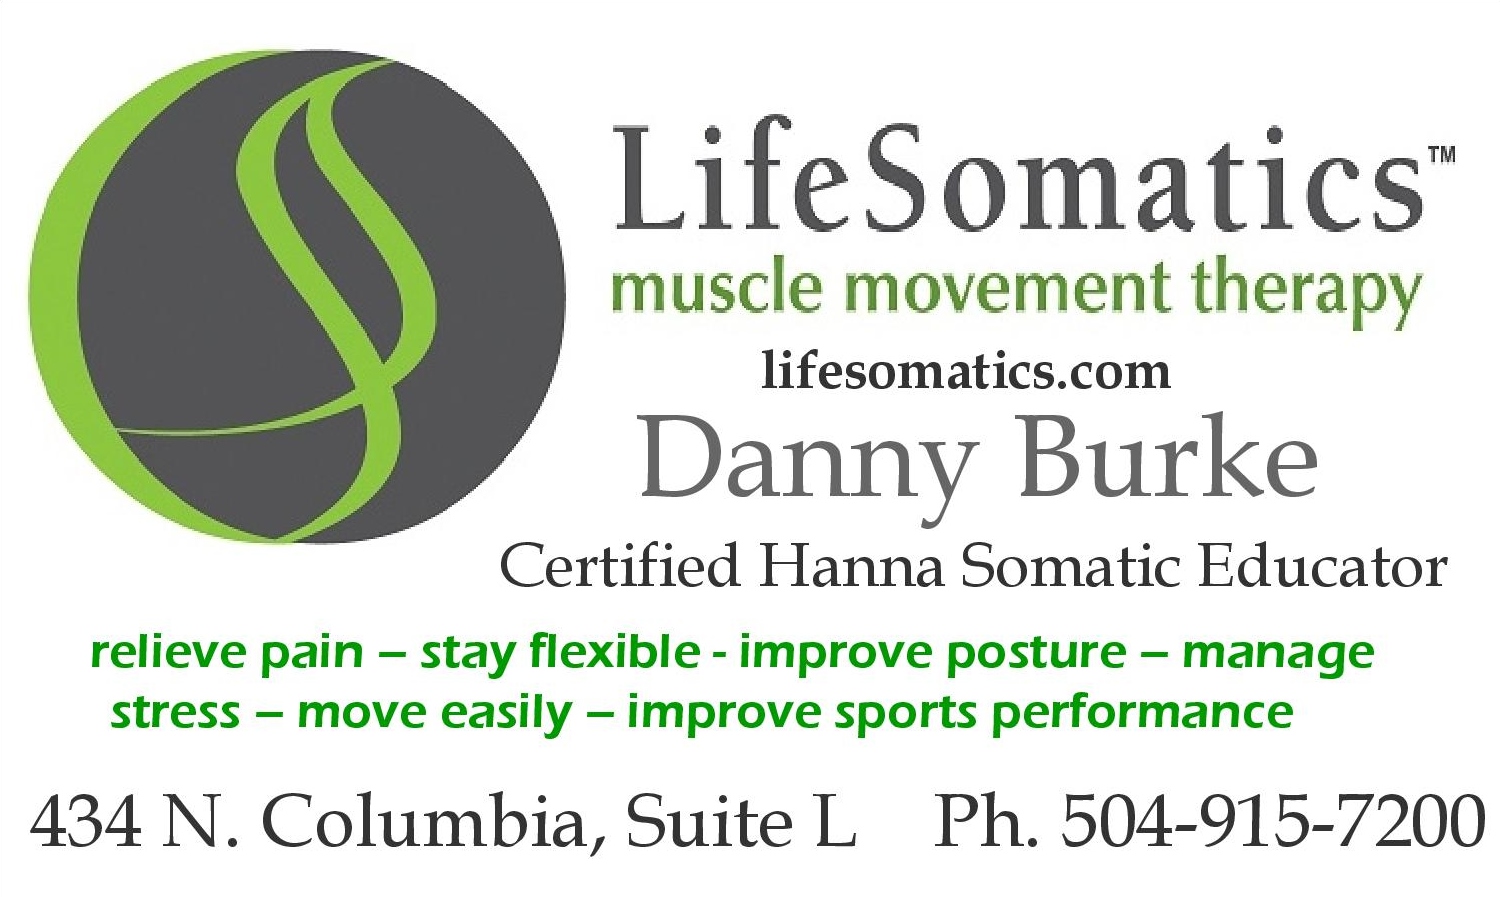 Life Somatics – Muscle Movement Therapy